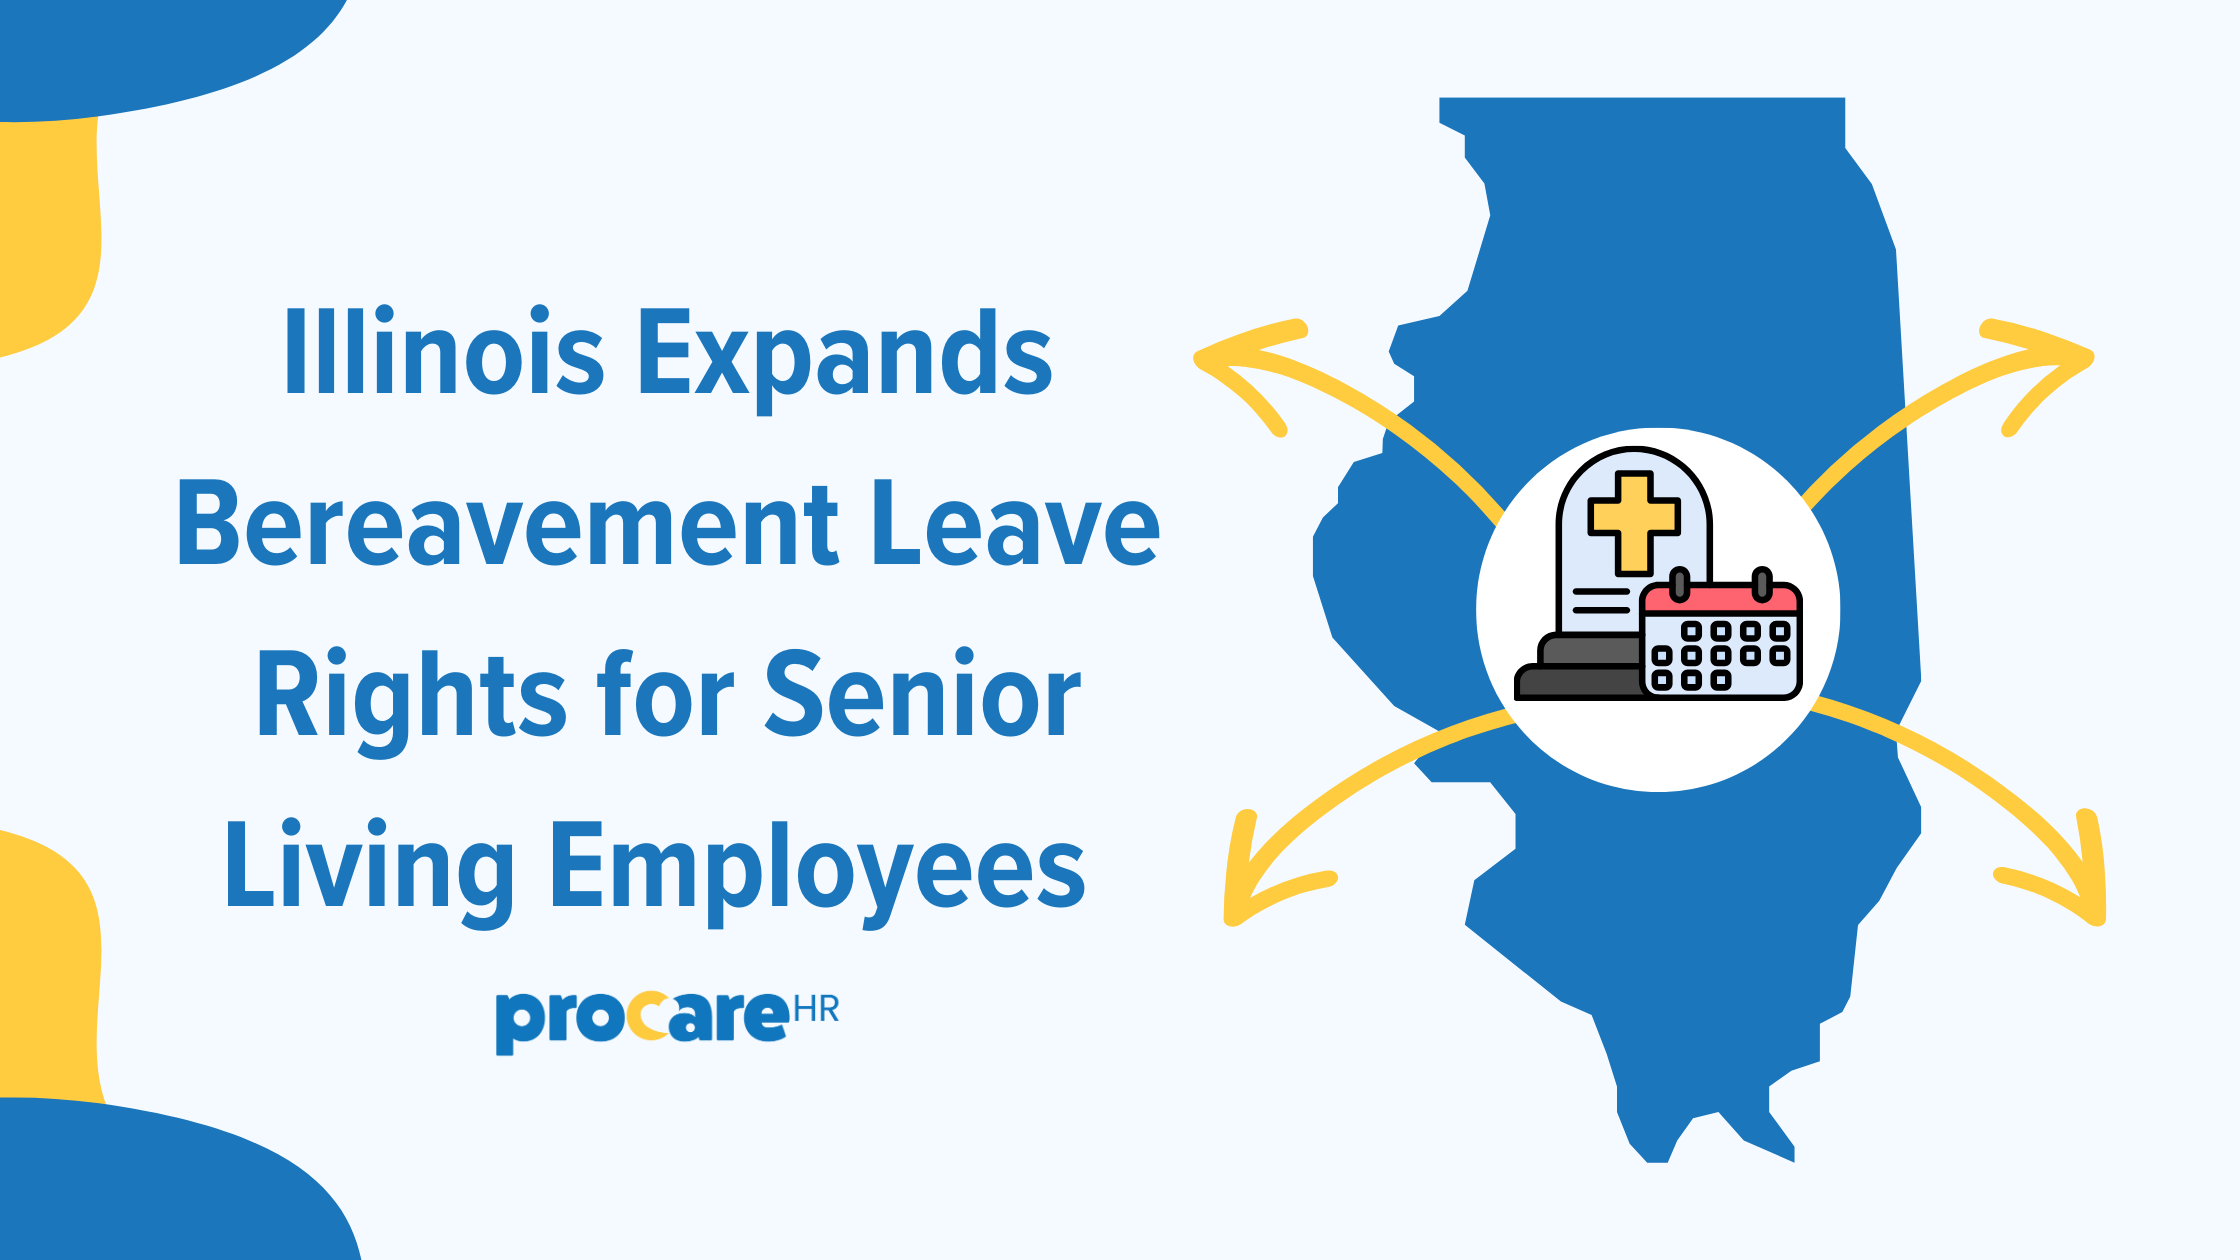 Illinois Expands Bereavement Leave Rights for Senior Living Employees